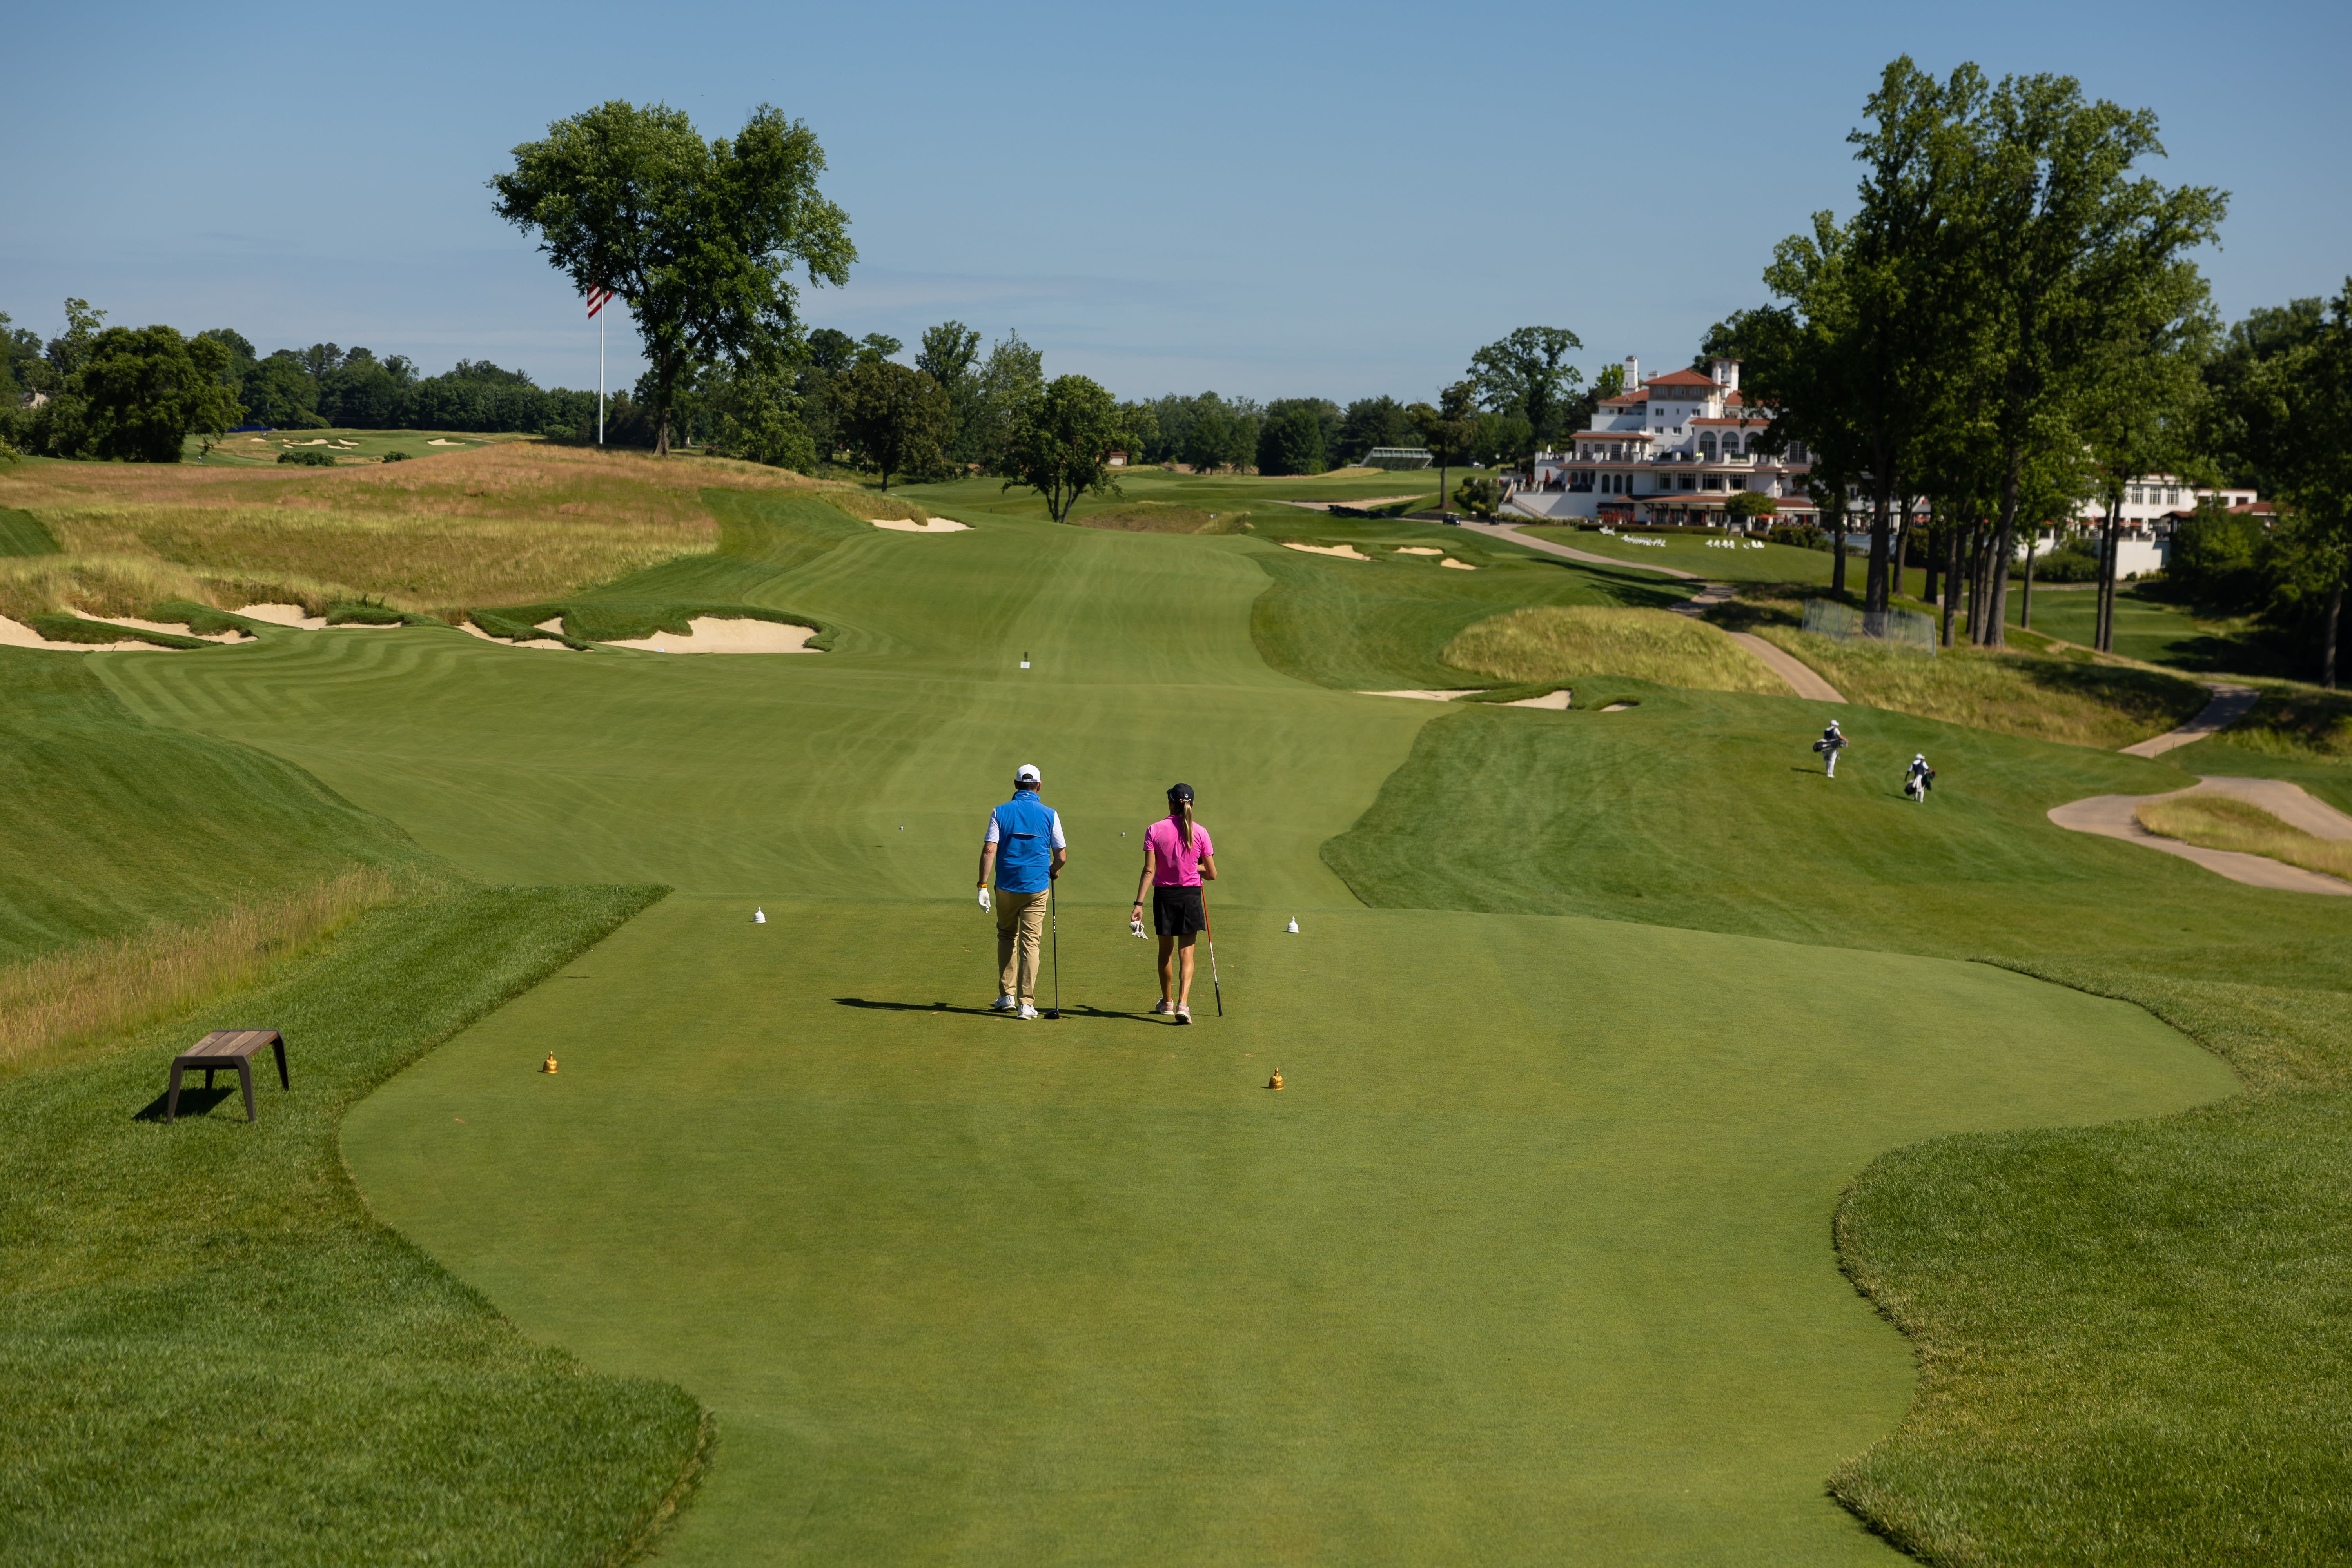 Jason Epstein, PGA and PGA Professional, Ashley Grier walk on the 15th fairway at Congressional Country Club 